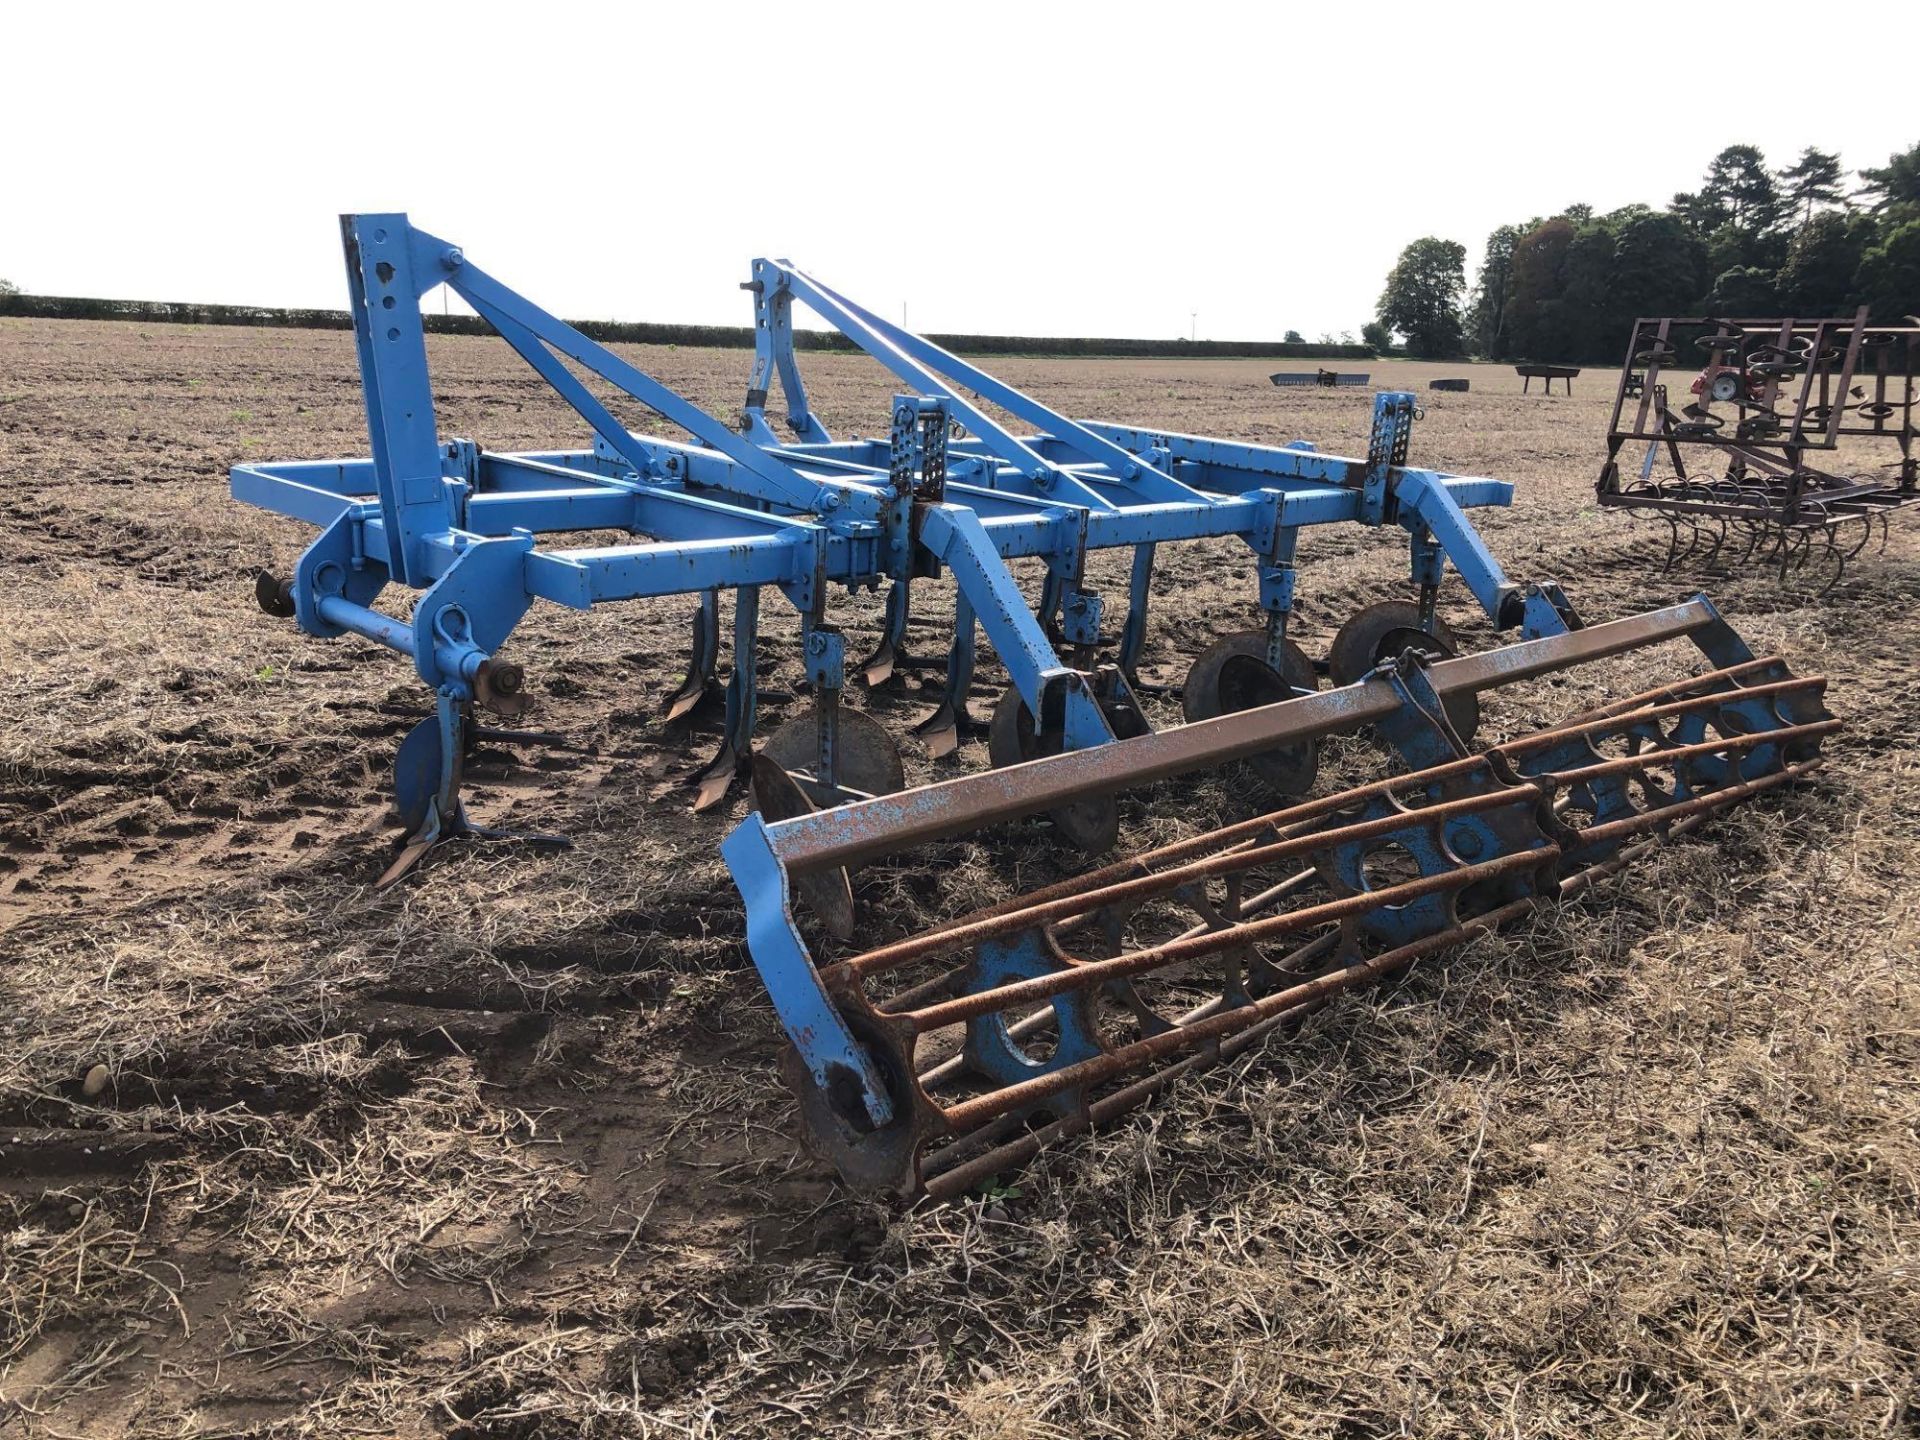 Lemken Smaragd 4m 9 leg fixed tine cultivator with discs, rear crumbler and end tow kit. Serial No: - Image 3 of 5